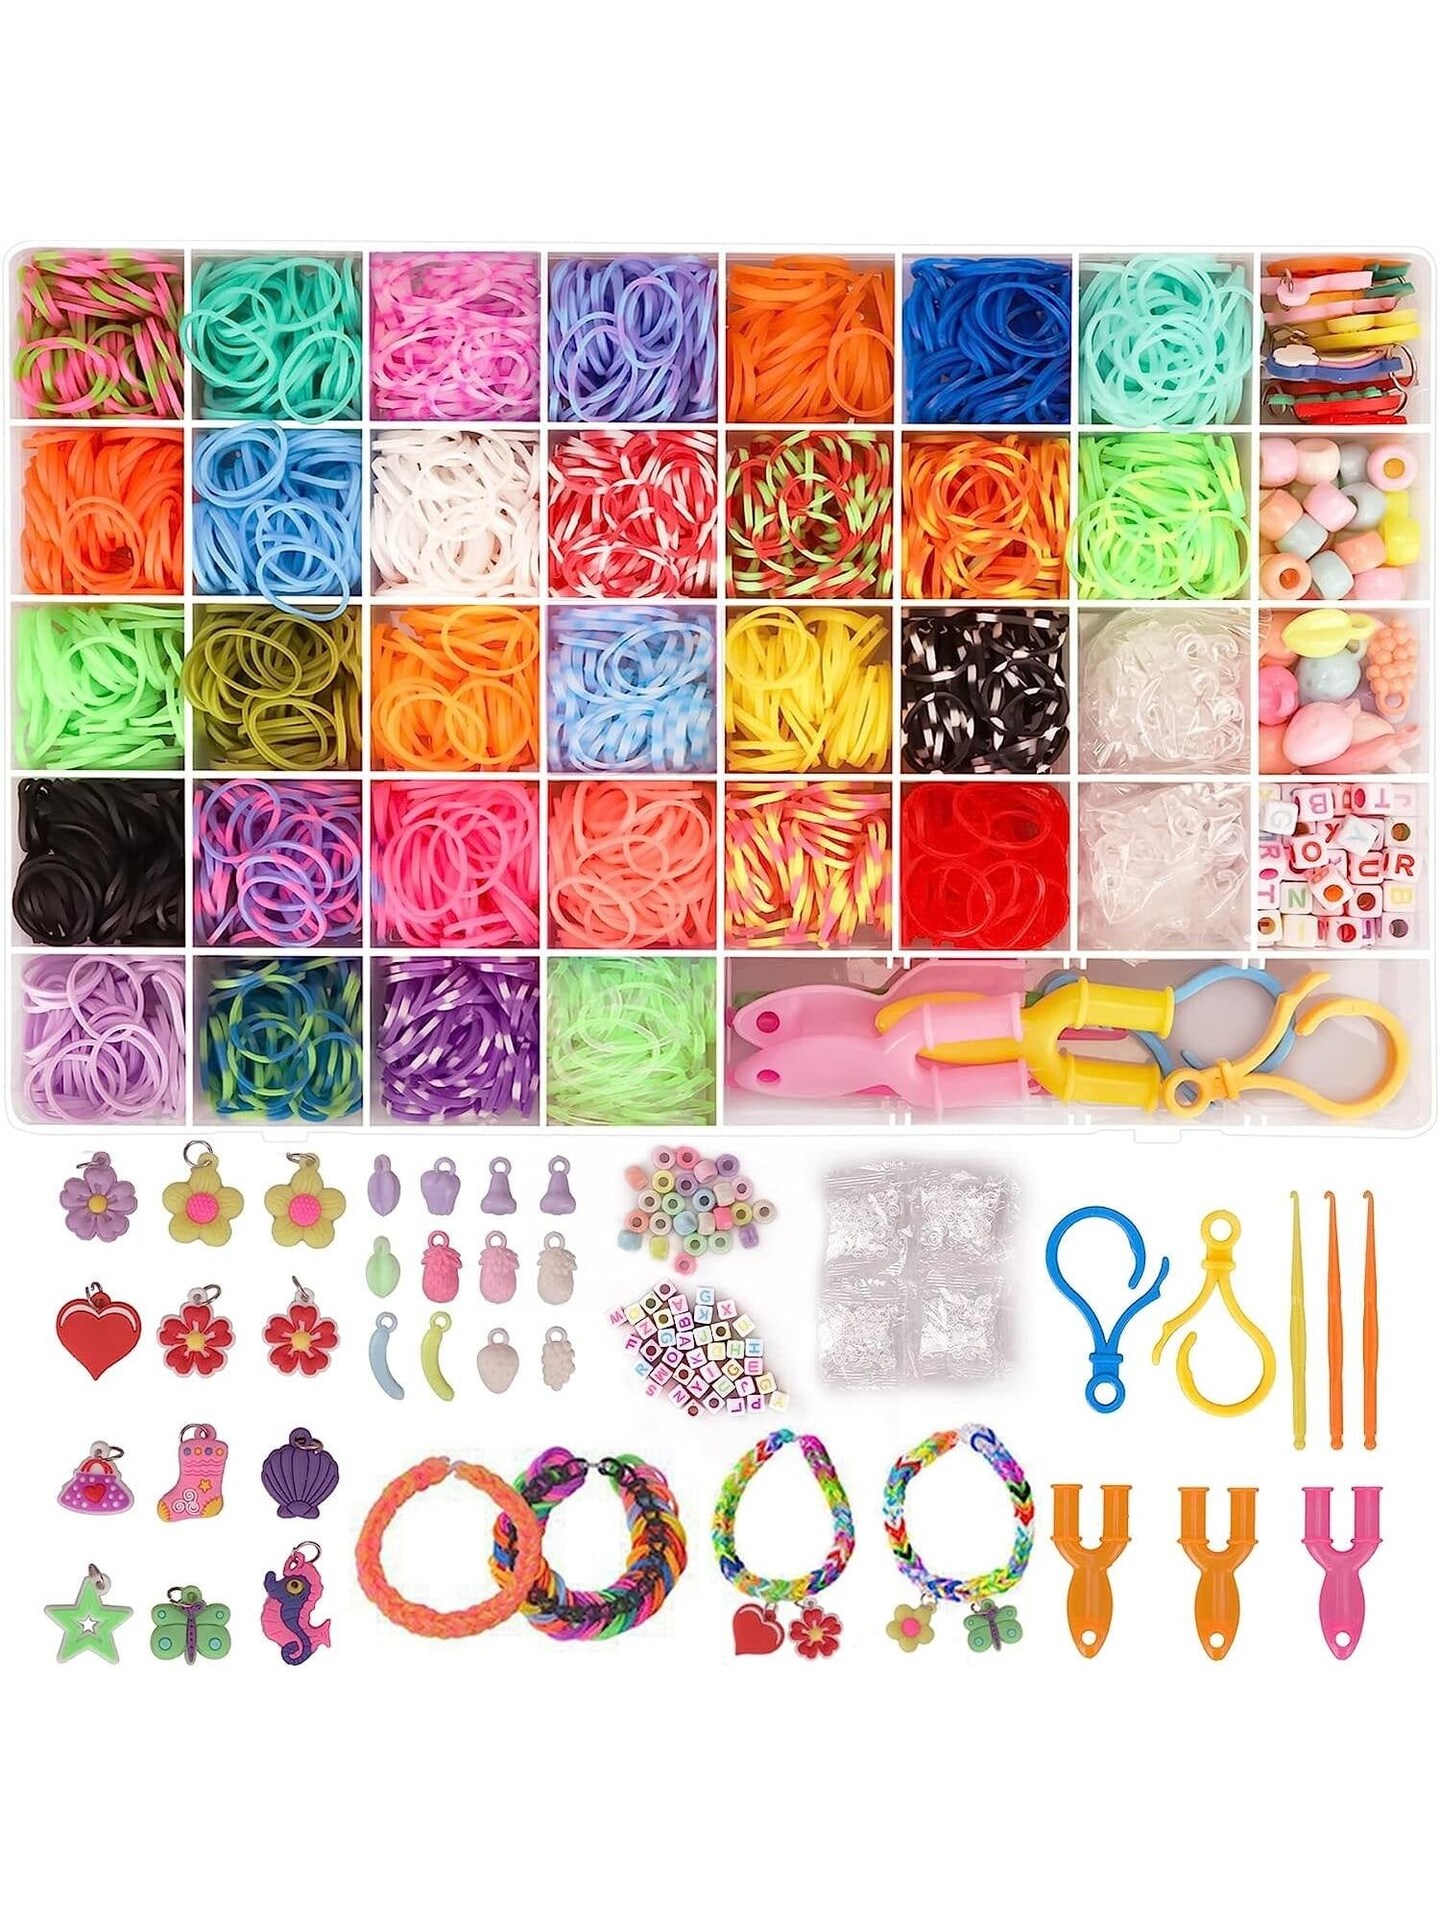 3000 Rubber Band Bracelet Kit, Colorful Loom Bracelet Making Kit with  Storage Box, DIY Art Kit with Charms Beads for Beginners Kids Girls Boys  Birthday Parties Christmas Gift